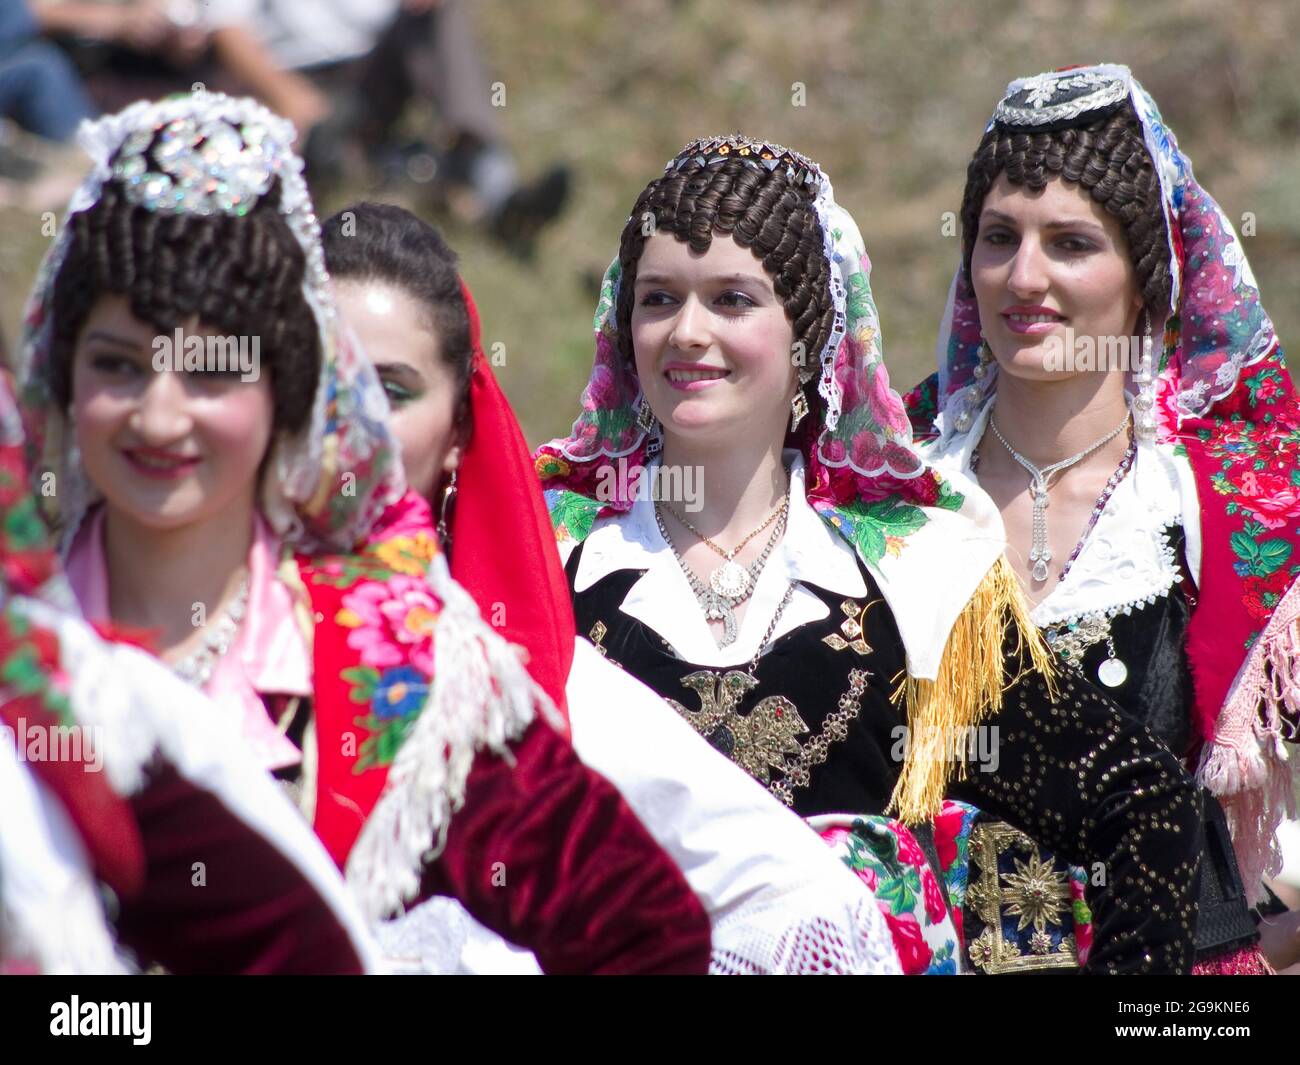 Lepushe, Albania - August 11, 2012: parade of some competitors to 